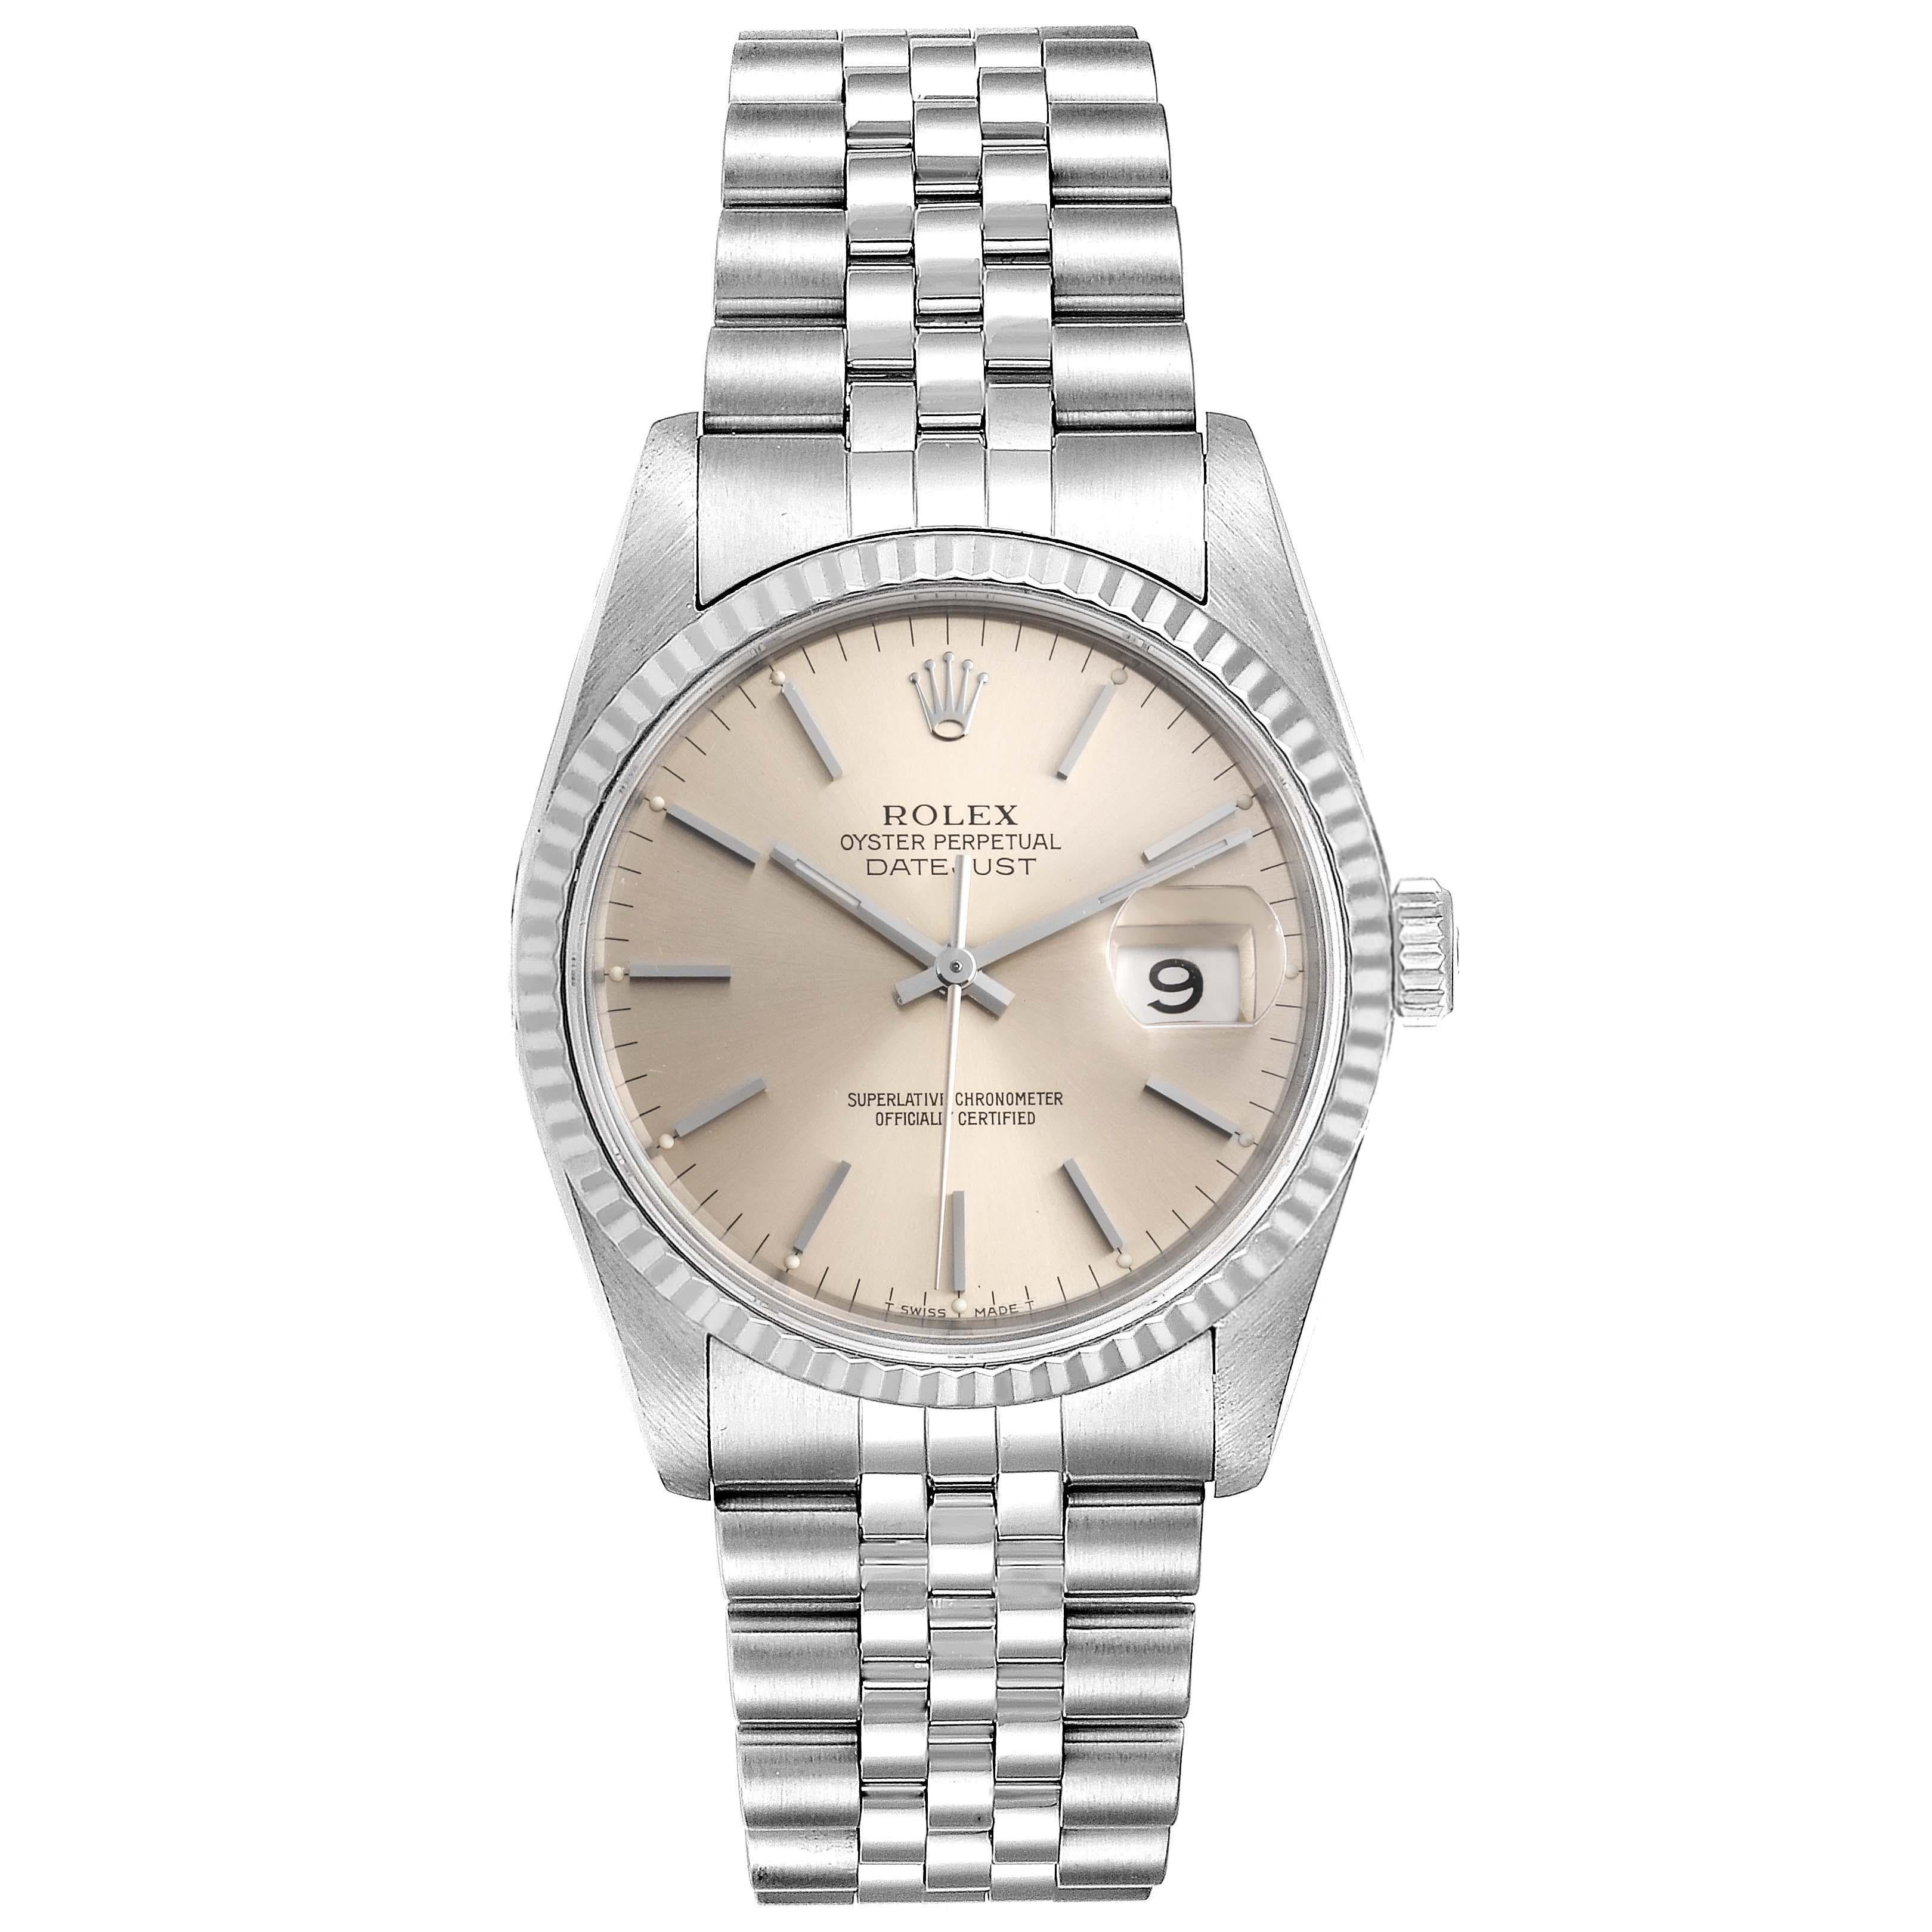 Rolex Datejust Jubilee Bracelet Steel White Gold Mens Watch 16234. Officially certified chronometer self-winding movement. Stainless steel oyster case 36 mm in diameter. Rolex logo on a crown. 18k white gold fluted bezel. Scratch resistant sapphire